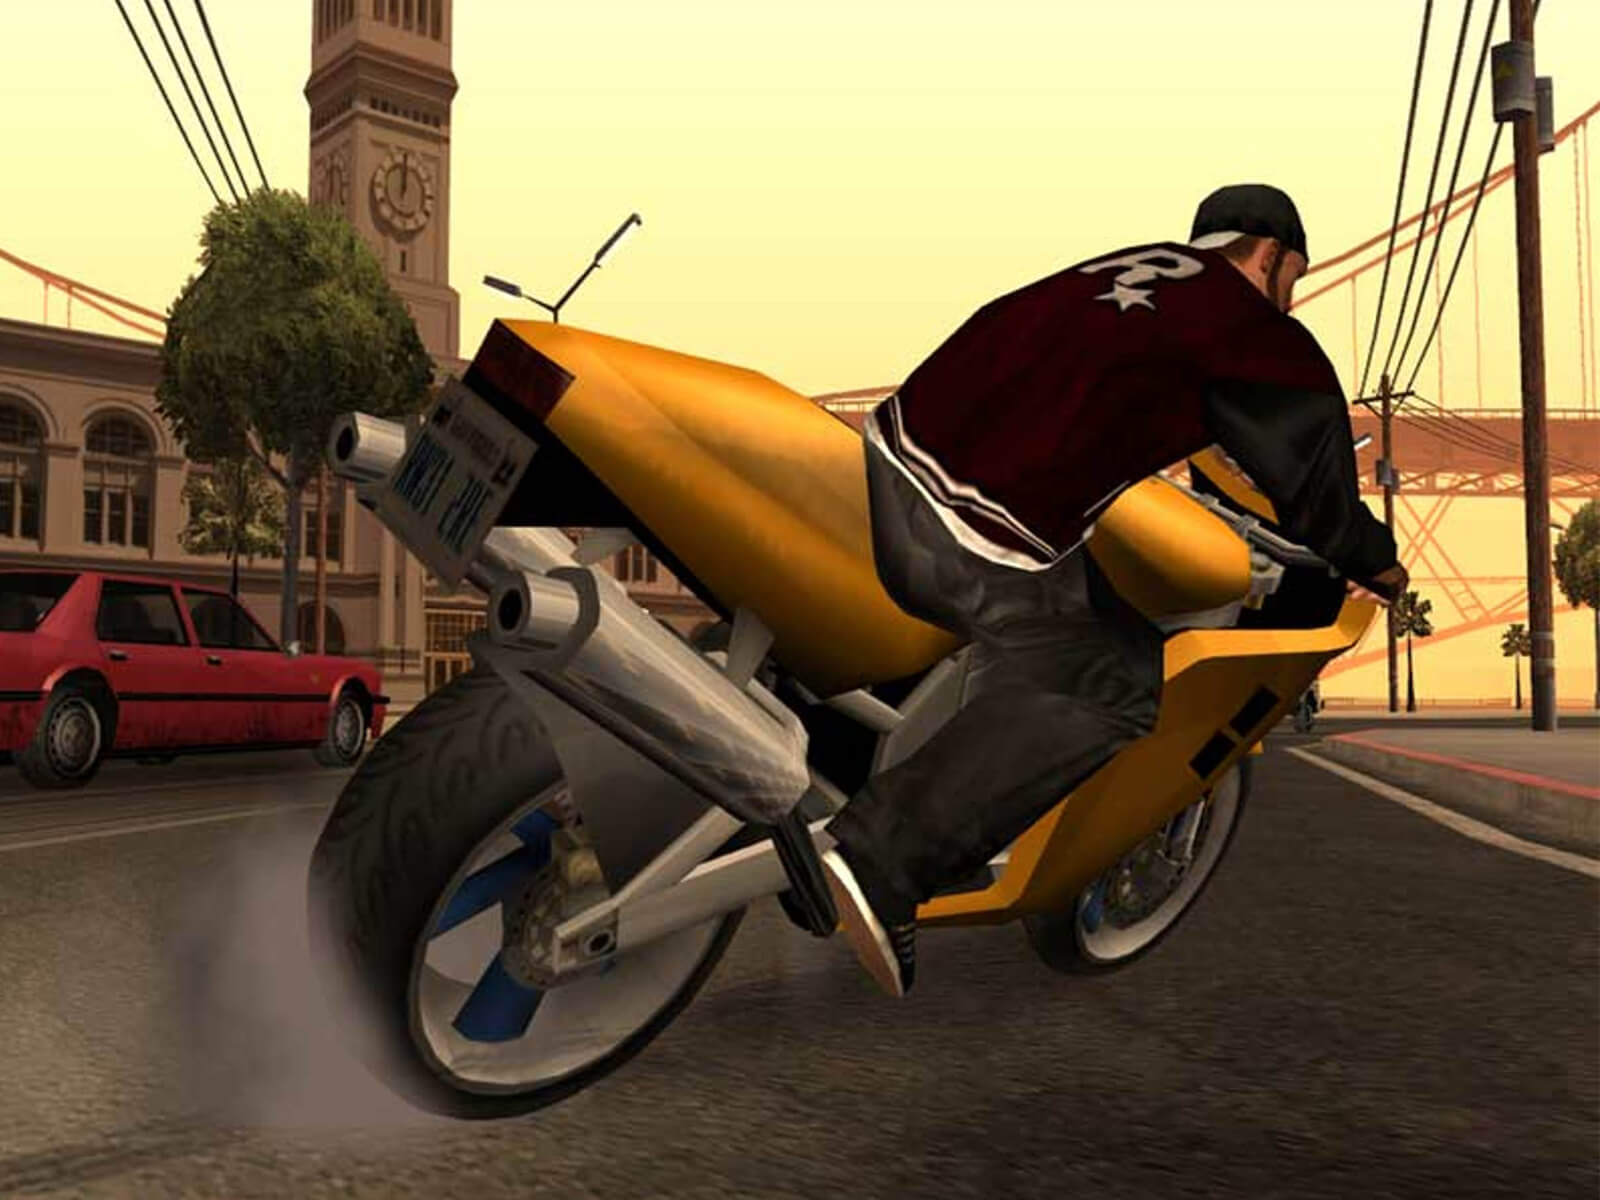 A screenshot from Grand Theft Auto: San Andreas of a man in a jacket with the Rockstar logo on it riding a gold motorcycle.